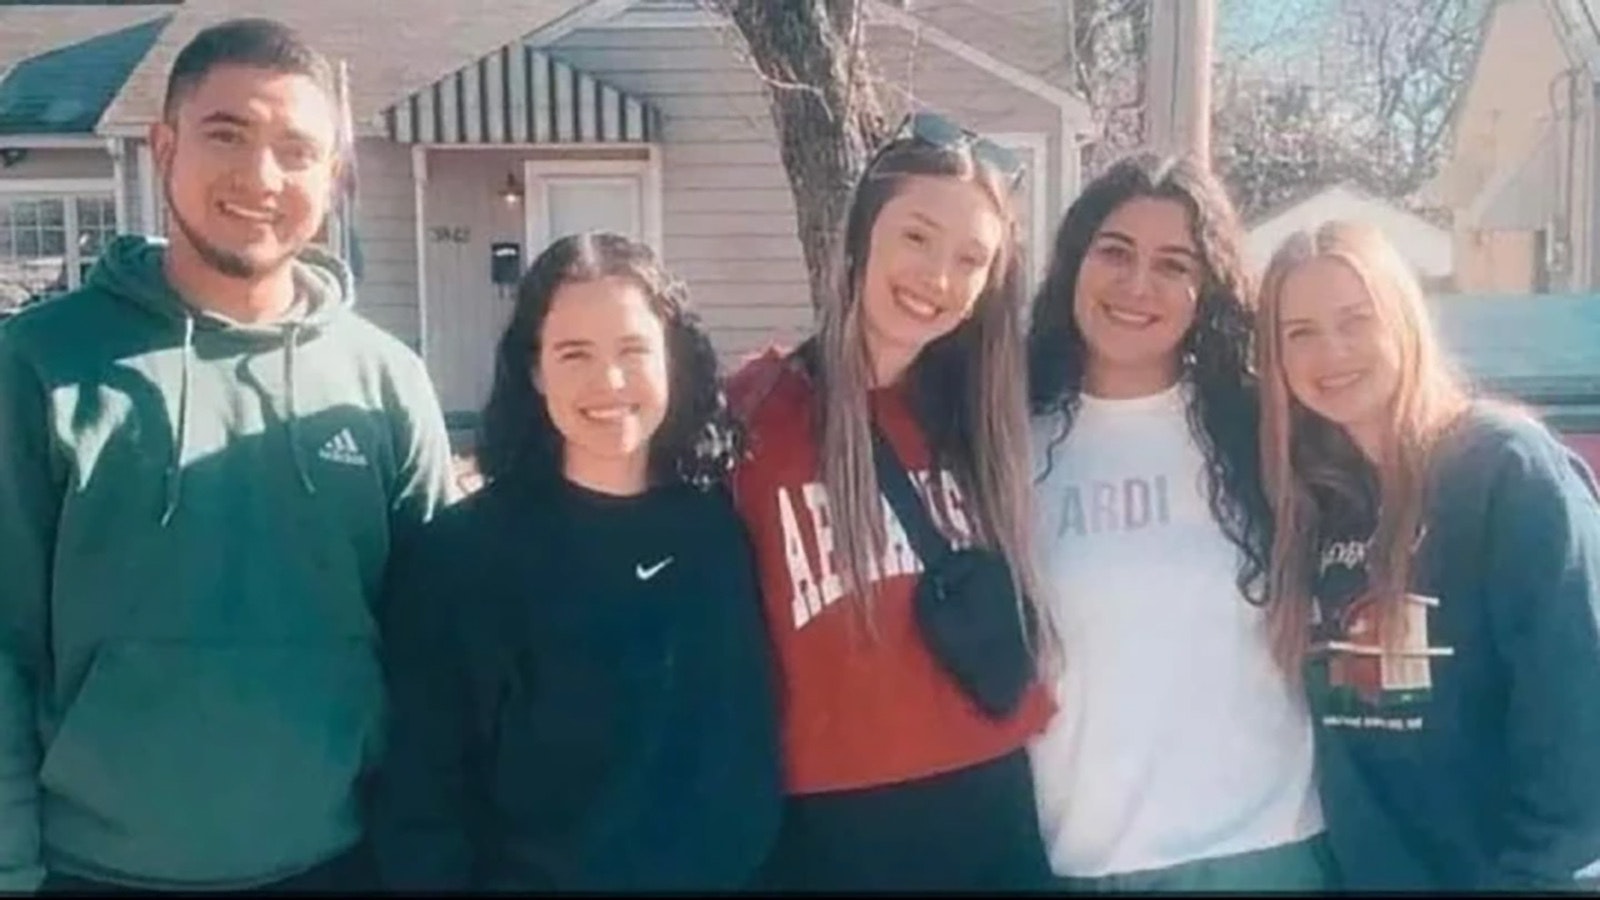 The five young people killed in the Jan. 22, 2023, crash are, not in order, Suzy Prime, Ava Luplow, Salomon Correa, Magdalene “Maggie” Franco and Andrea Prime. There were all on their way home to Arkansas after a visit to a Wyoming Bible college.